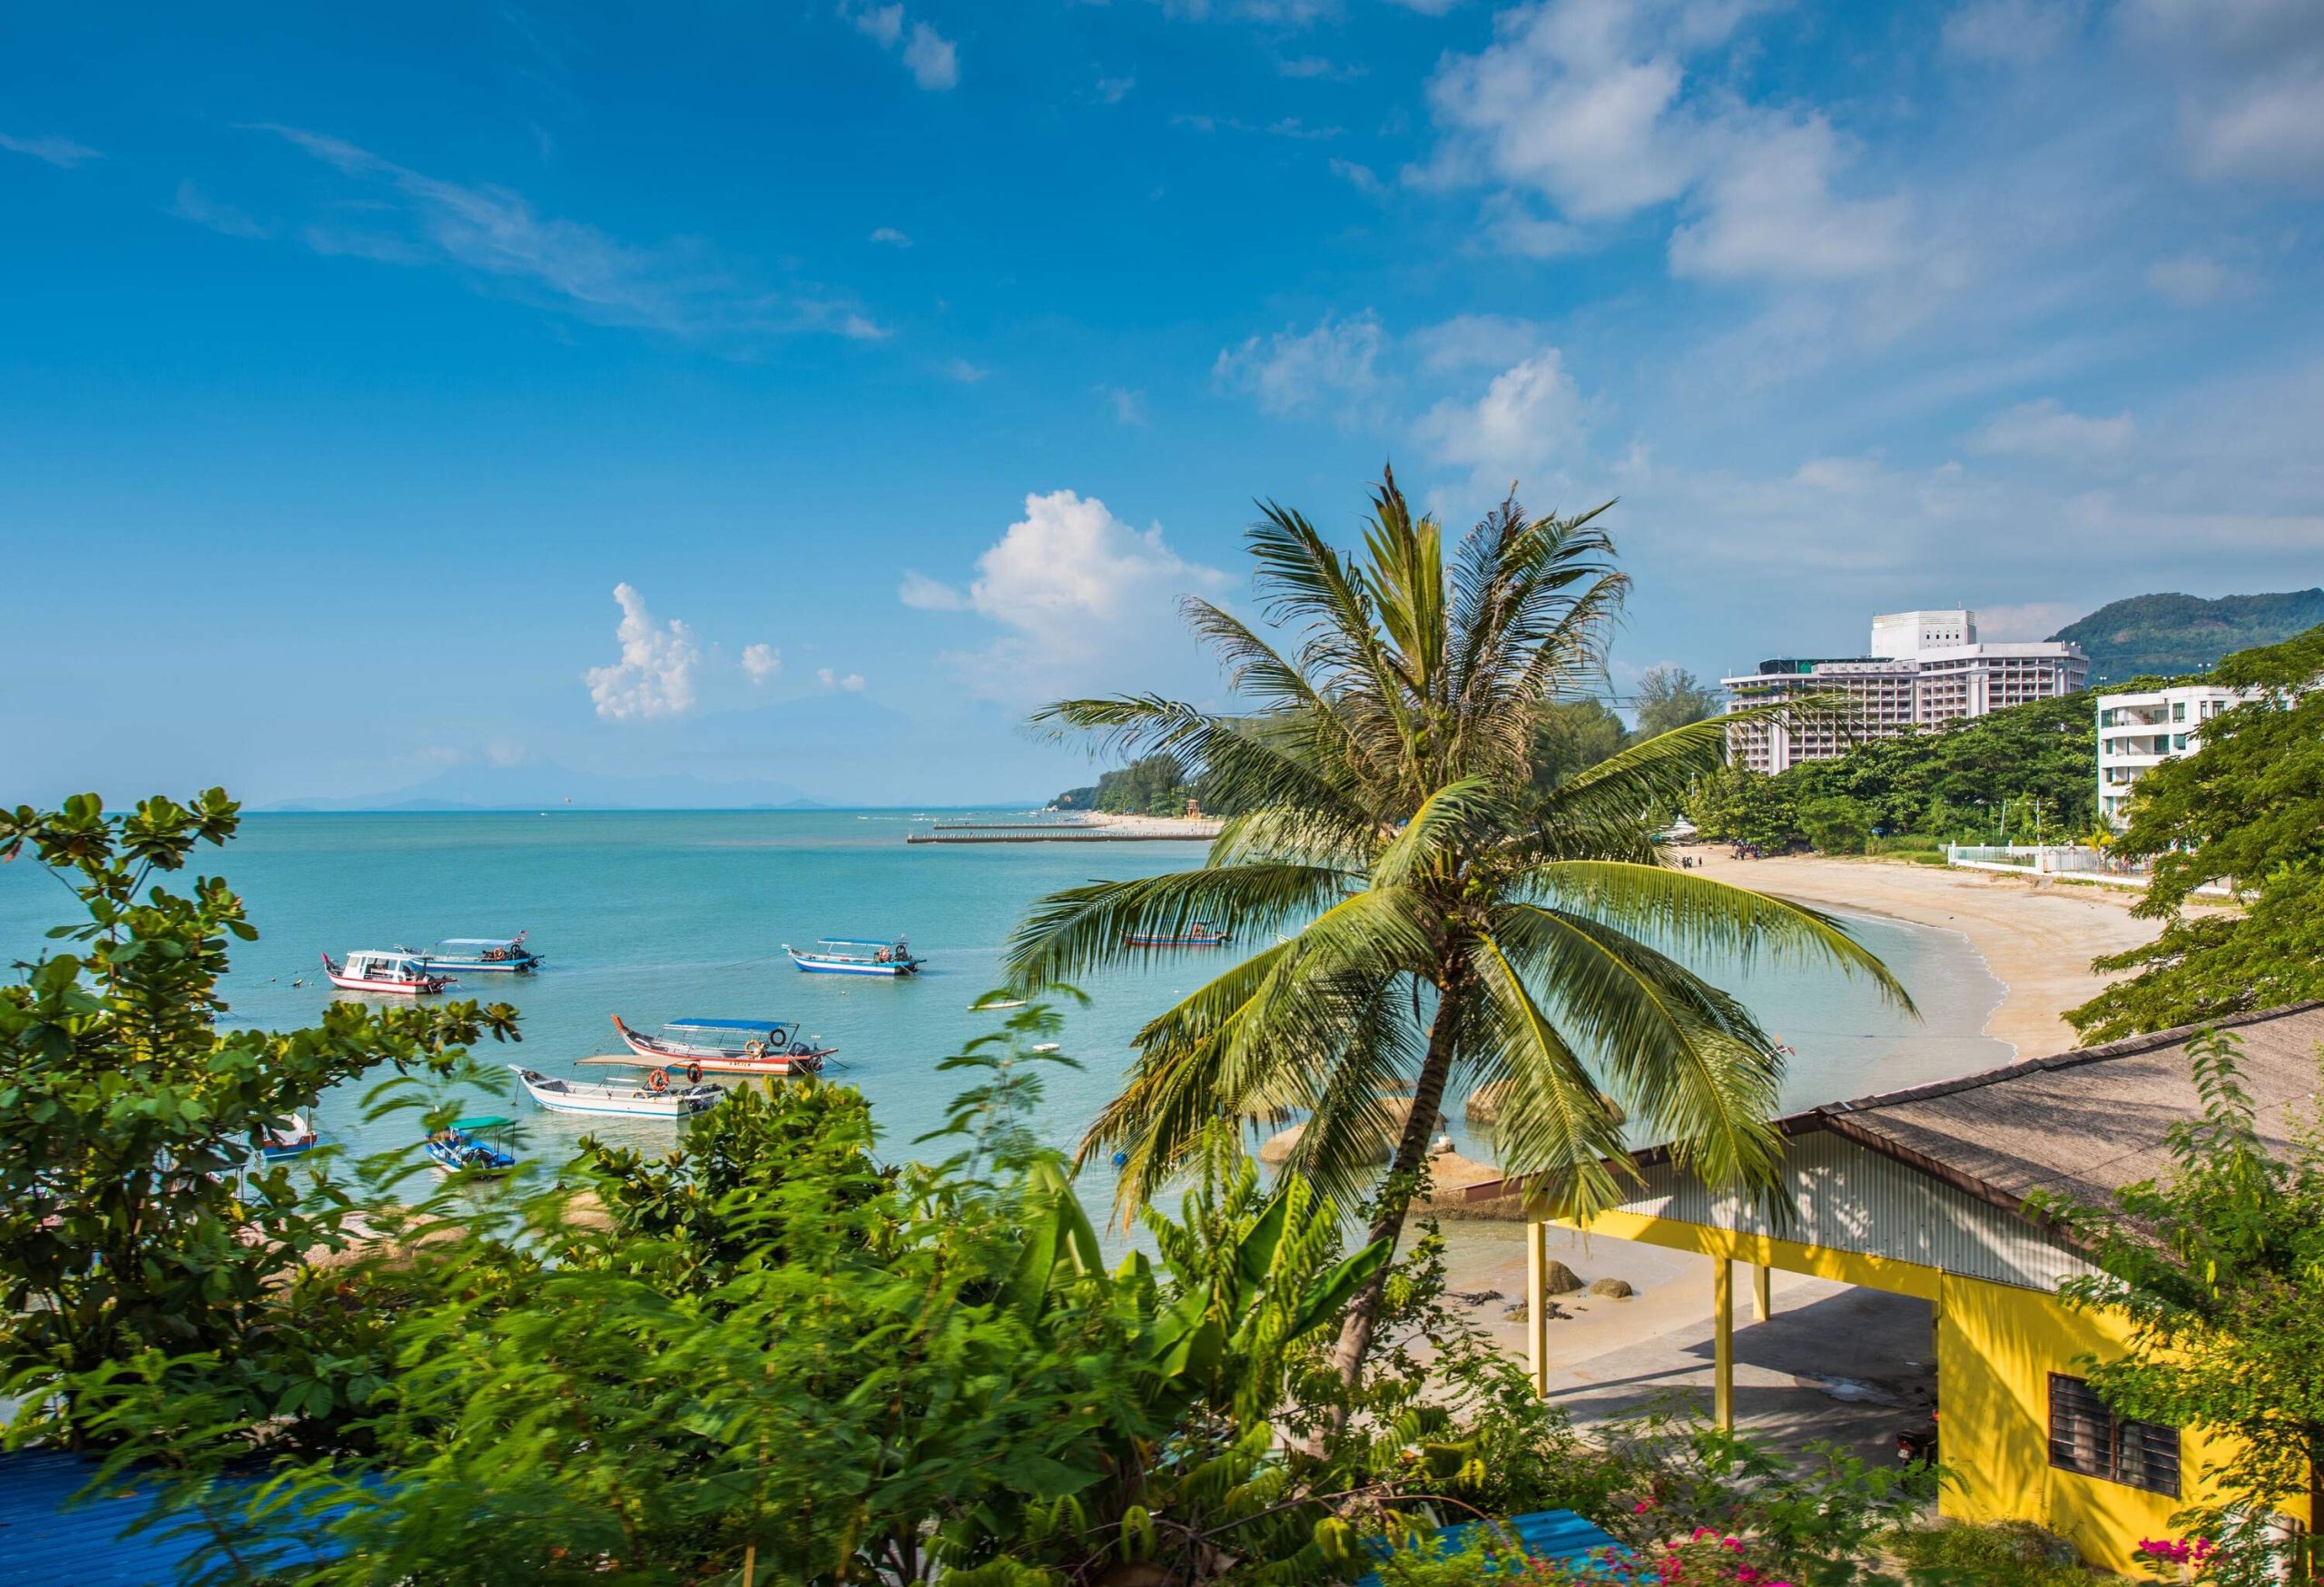 A tropical coast with beachfront buildings that look out to the sea strewn with boats.